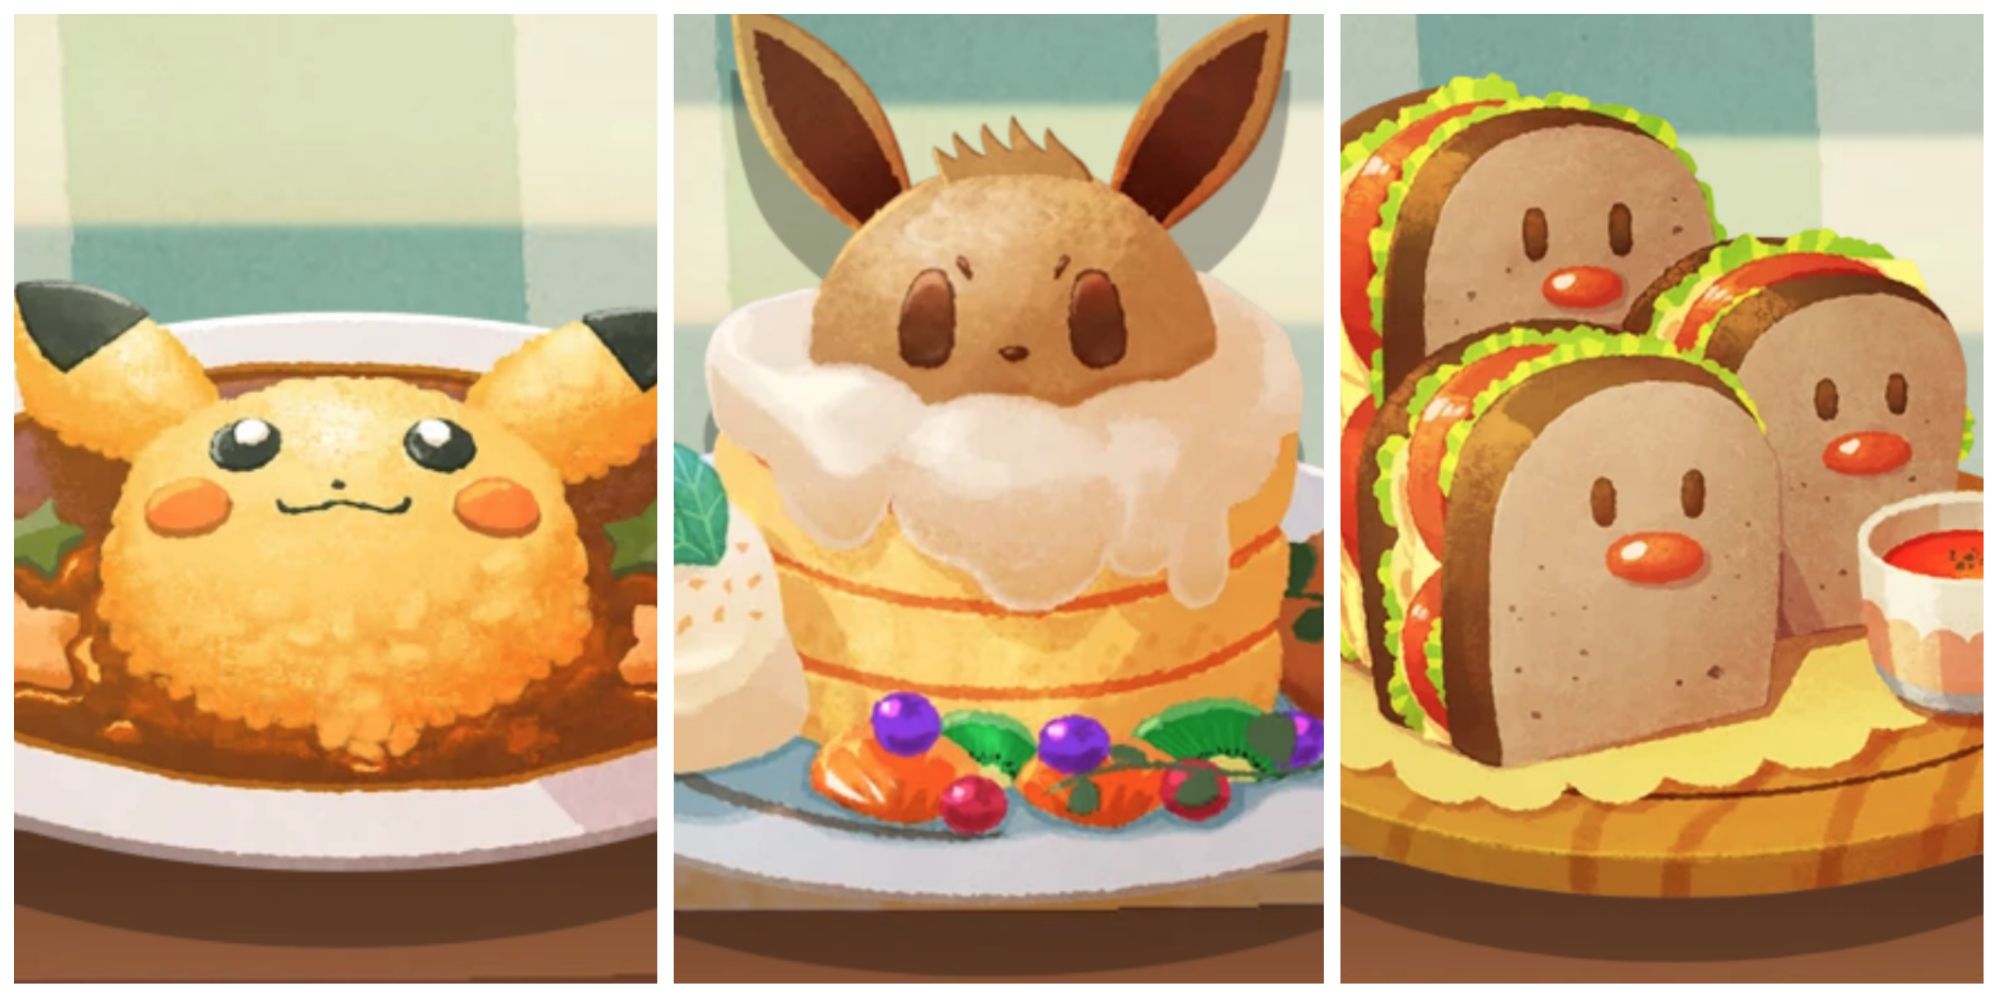 Header Image for X Meals You Would Order From Pokemon Cafe Remix featuring Piquant Pikachu Curry, Fluffy Eevee Pancakes, and Dugtrio Sandwich Trio